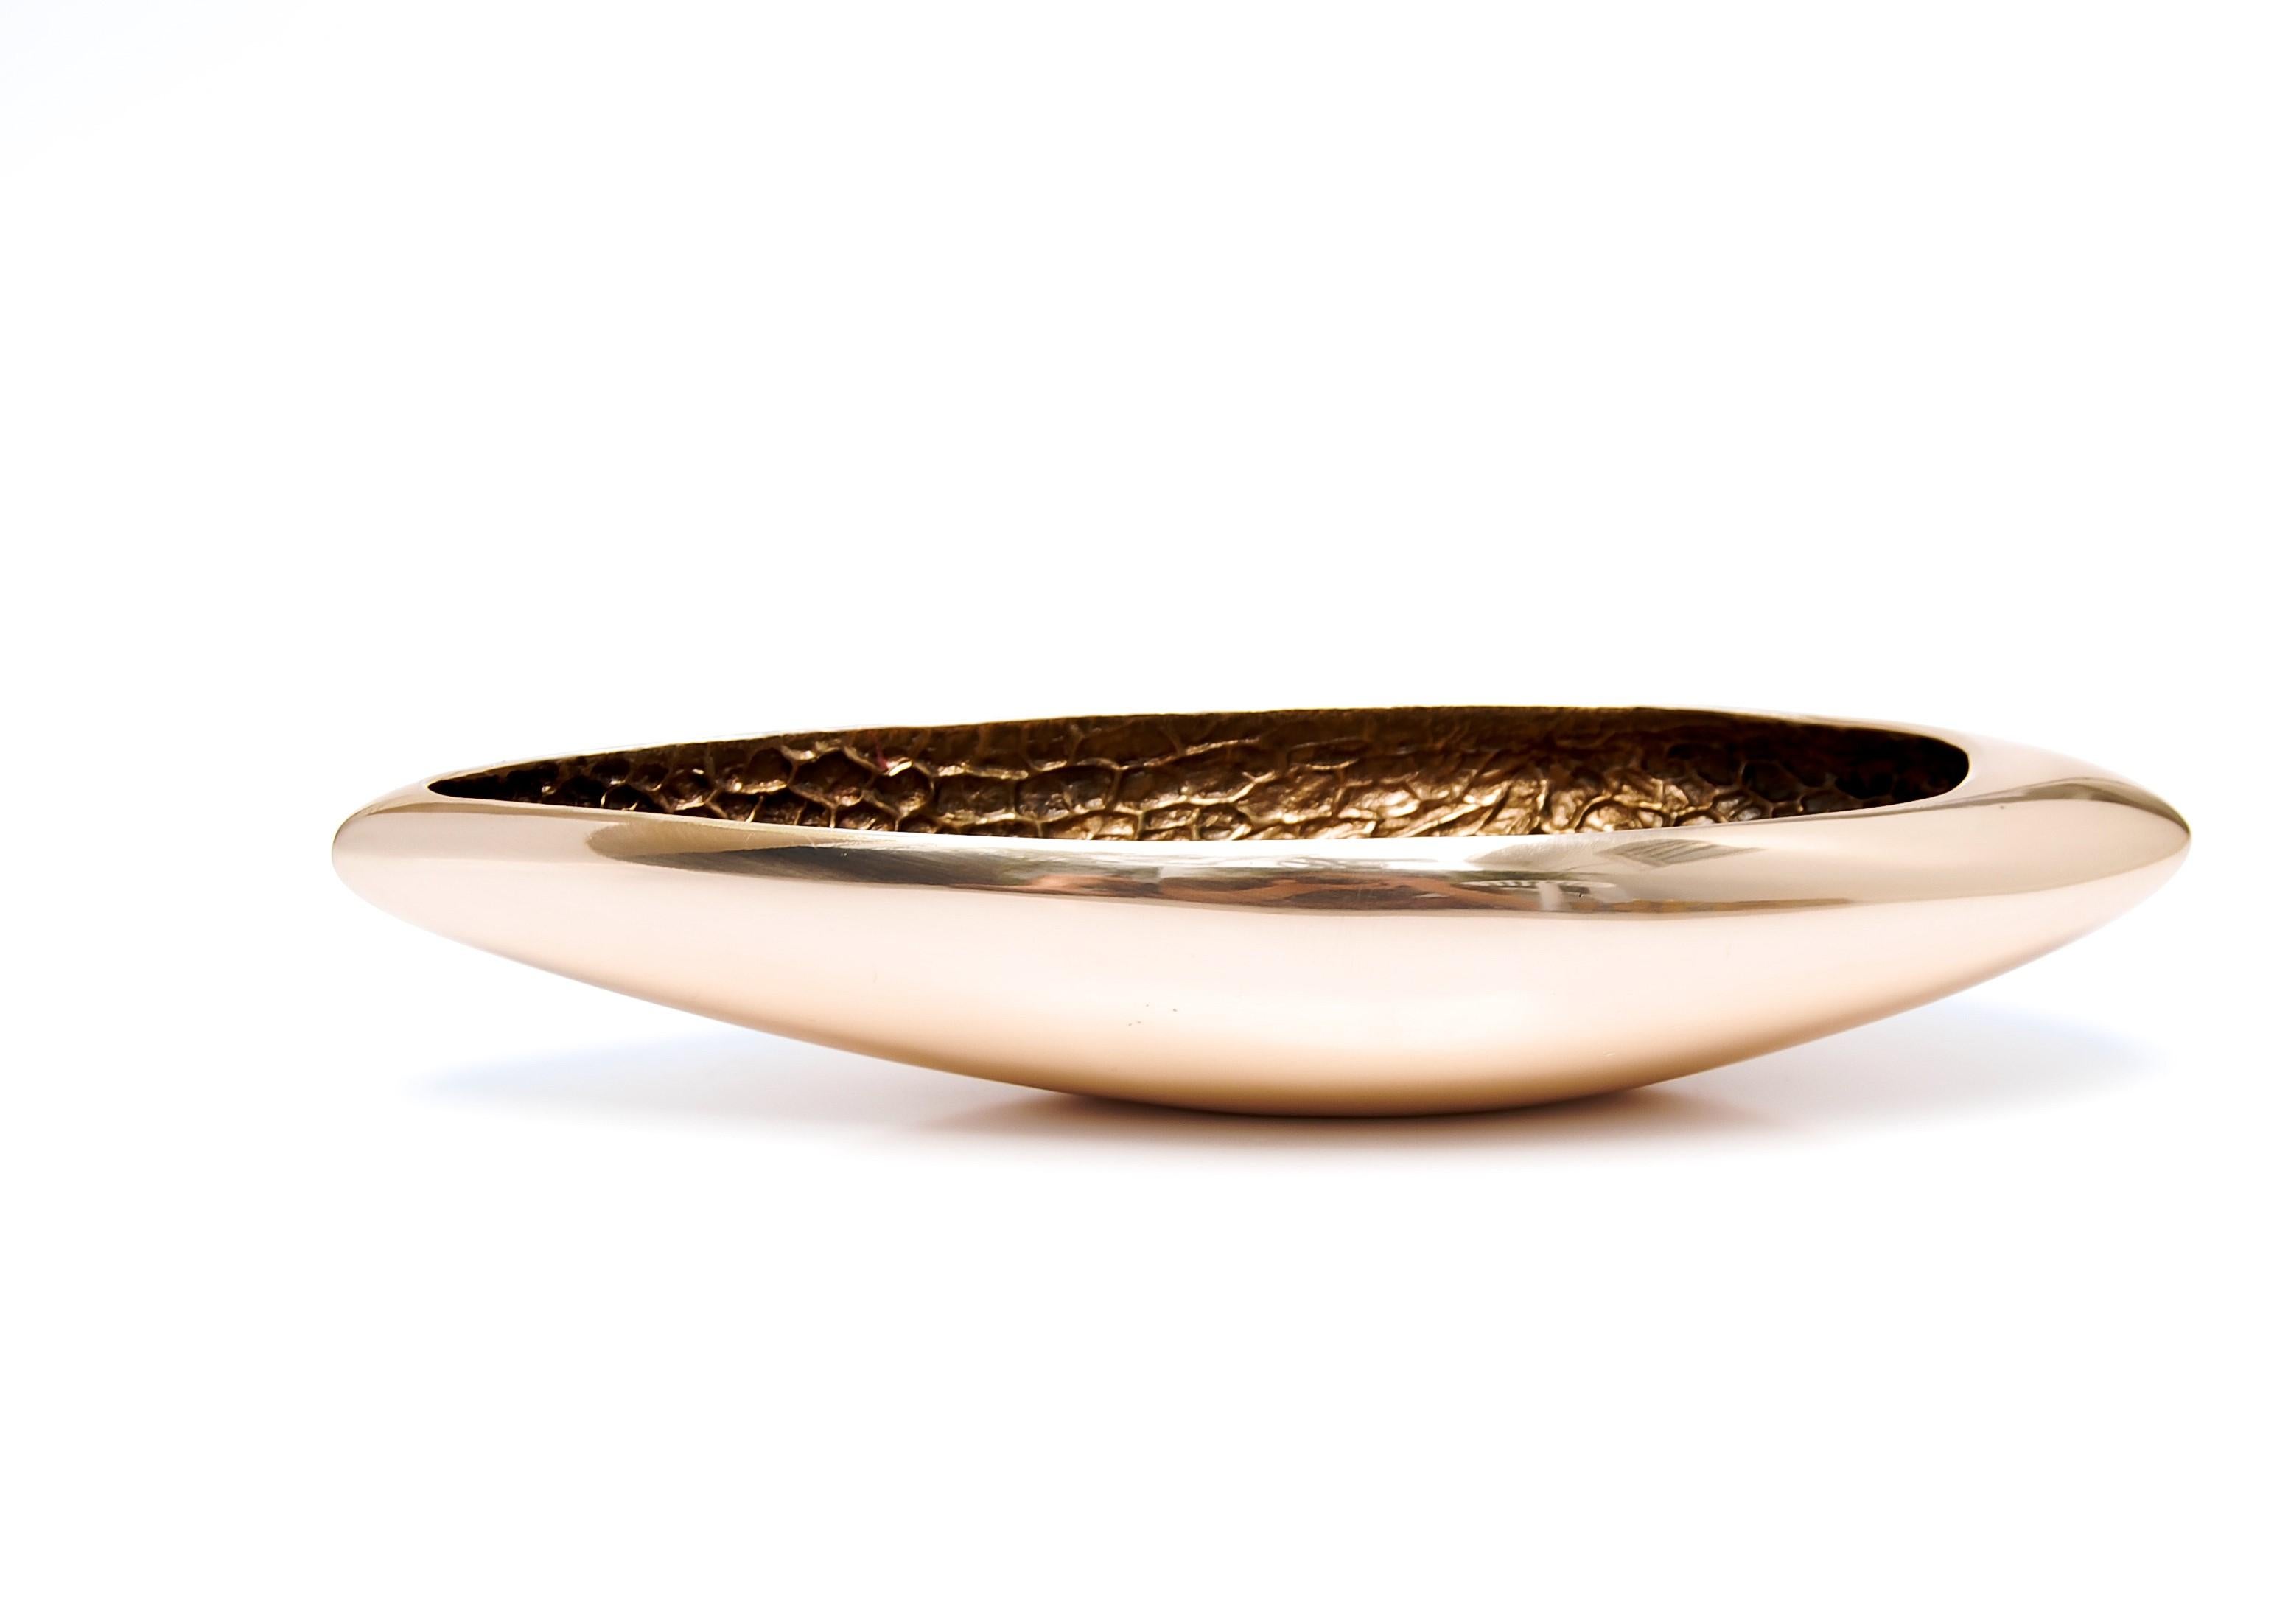 Bowl, centerpiece in polished bronze by Fakasaka design.
Dimensions: W 36 x D 12 x H 7 cm.
Materials: Polished bronze.
 